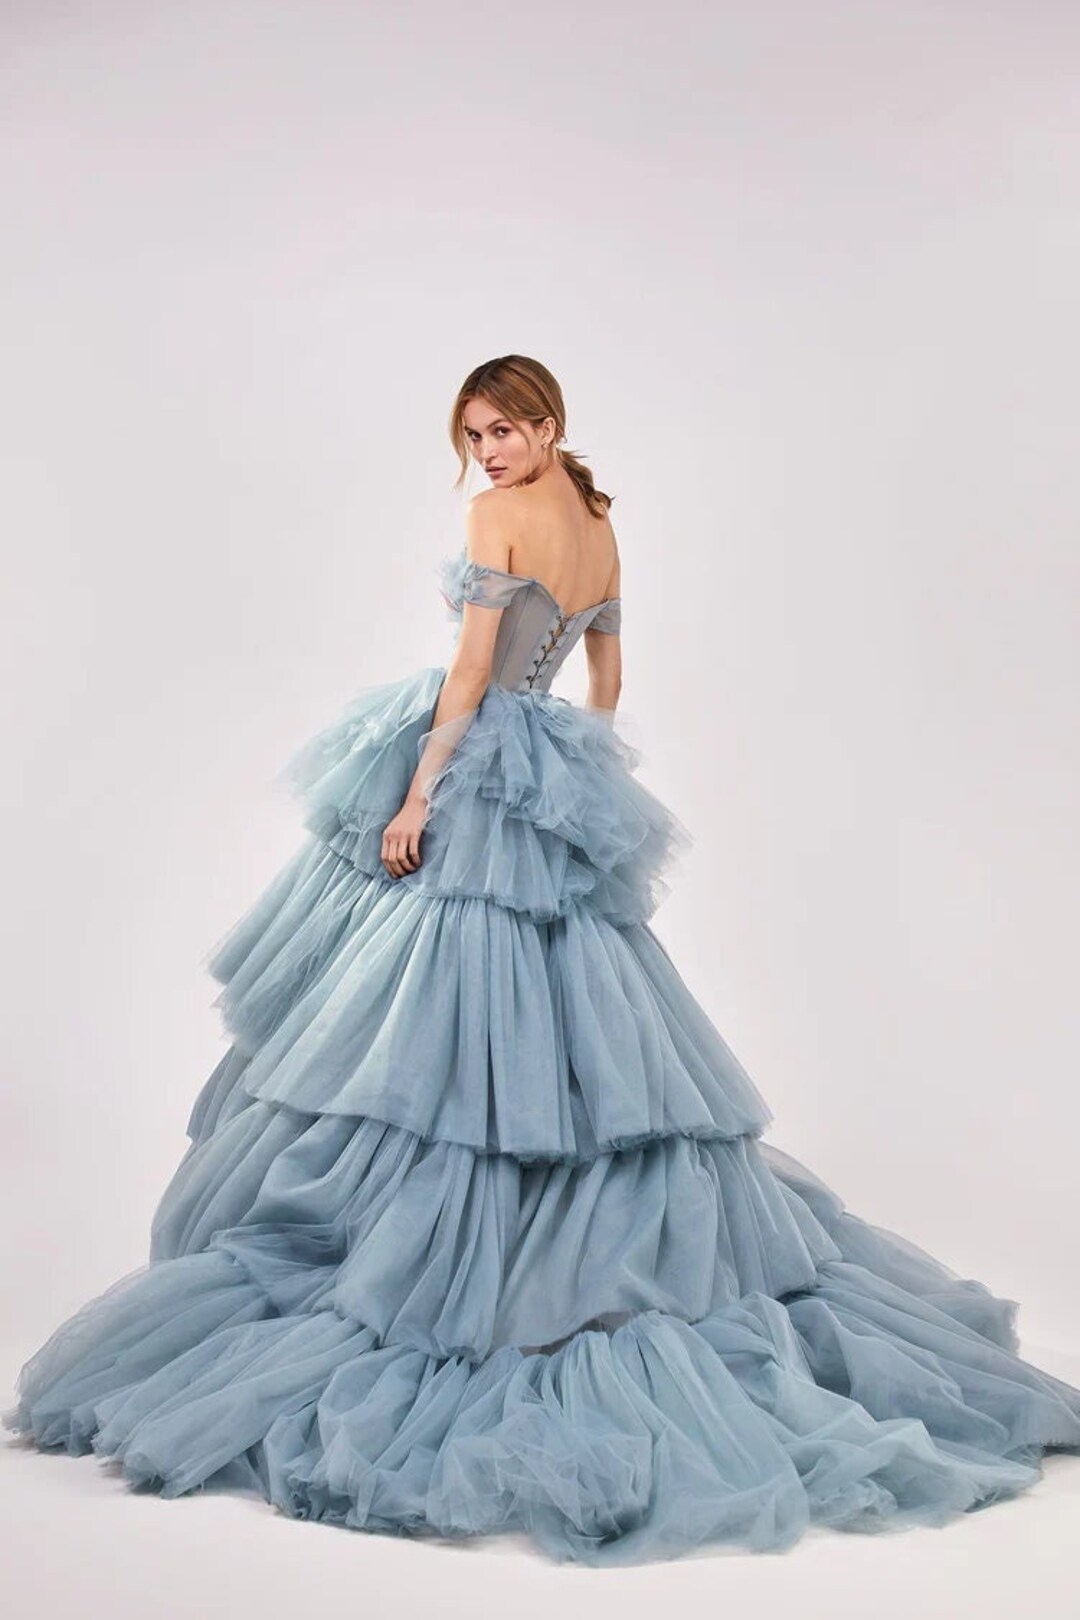 Elegant Tiered Ruffled Tulle Prom Dress Feathers Flowers off - Etsy